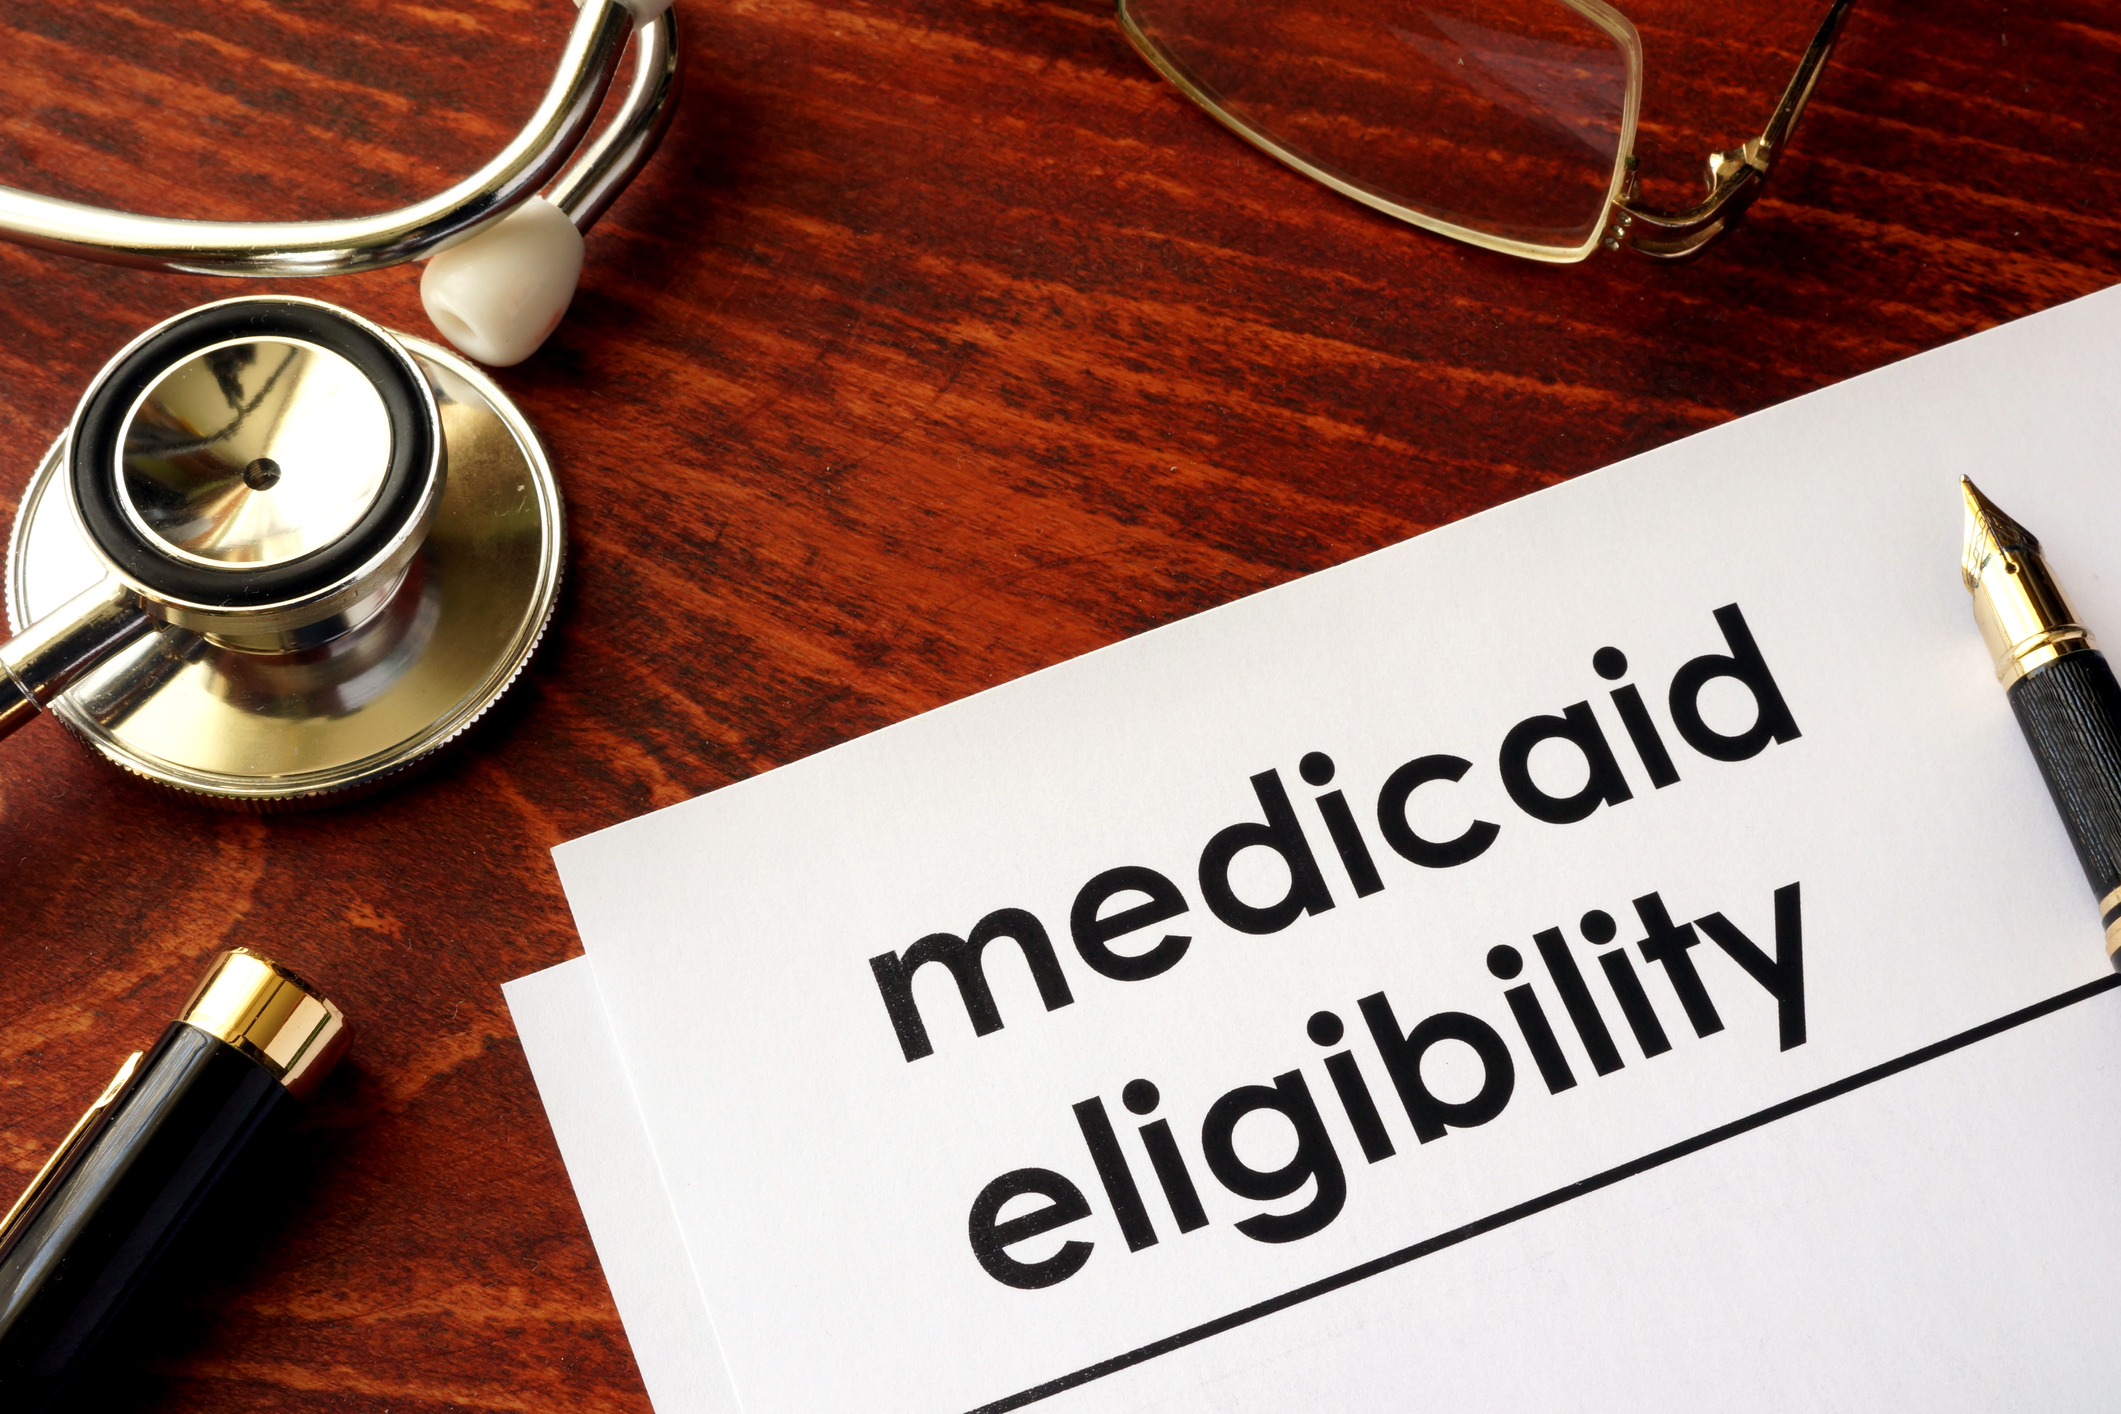 Medicaid benefits some, but the program can have its limitations